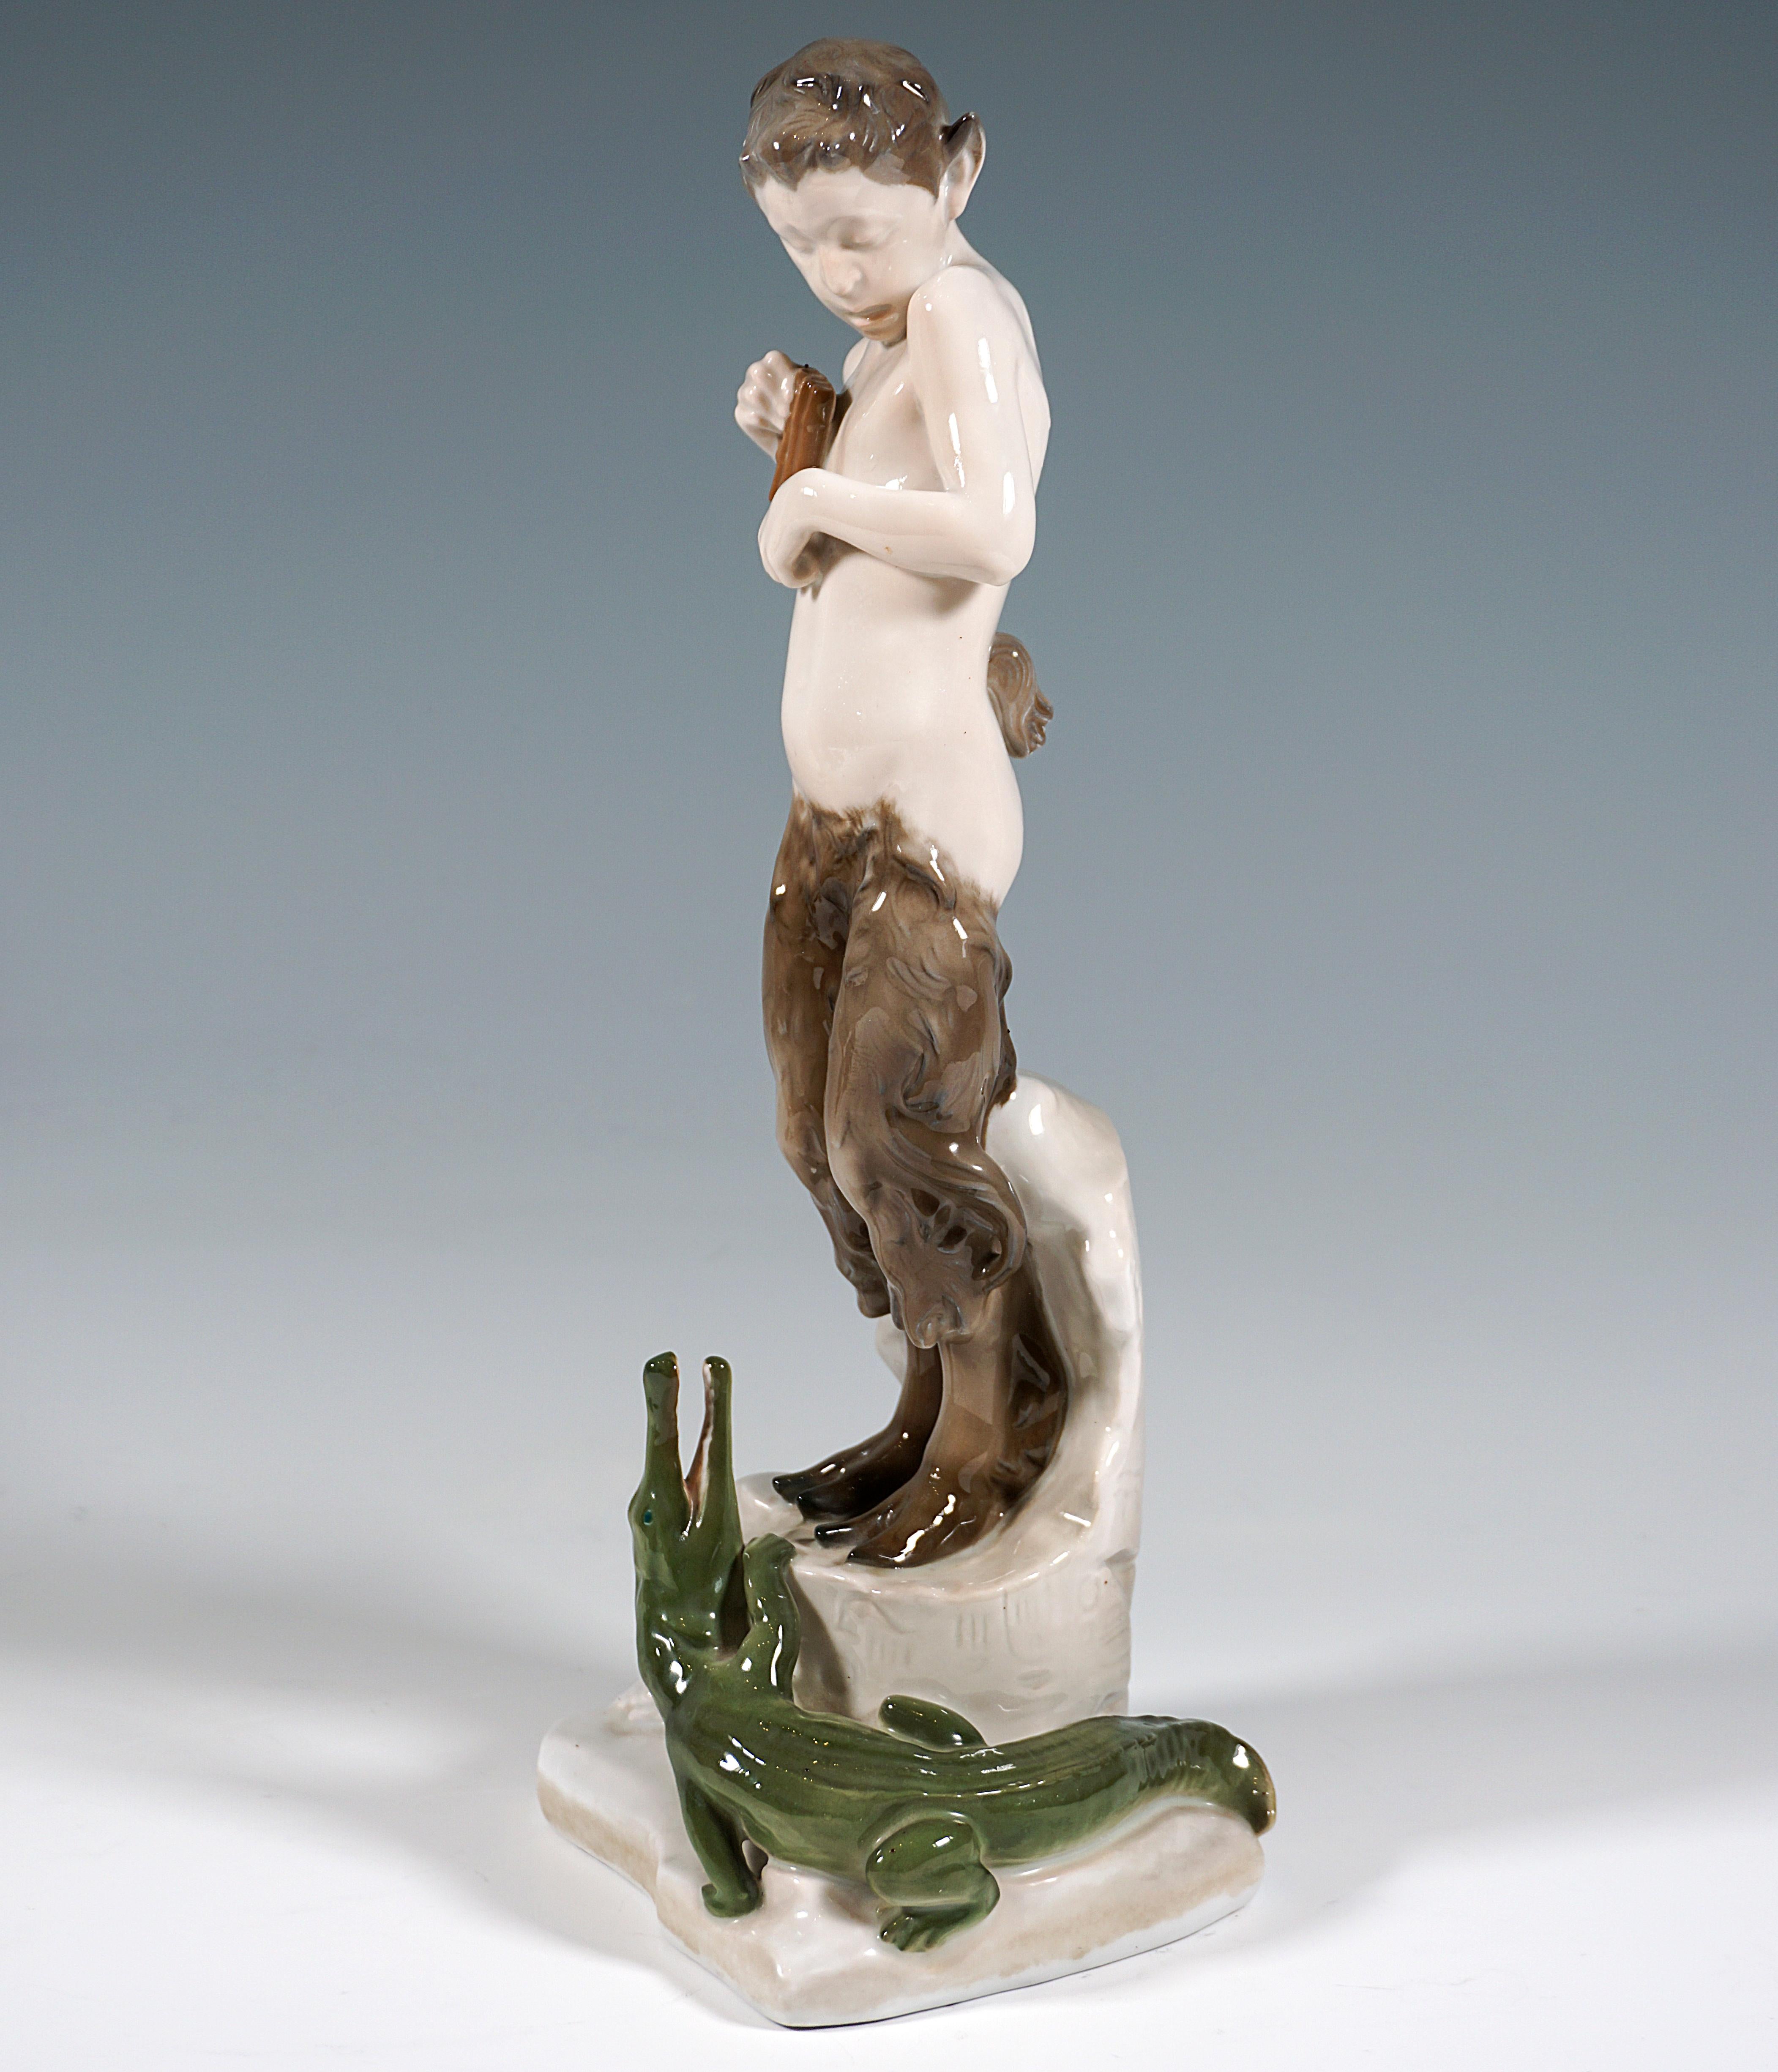 Admirable Art Nouveau Figurine by Rosenthal.
Faun terrified standing on a broken piece of ruins with Egyptian inscriptions, holding a pan flute in his right hand, at his feet a crocodile, looking up at him with open mouth and climbing up to him.
On